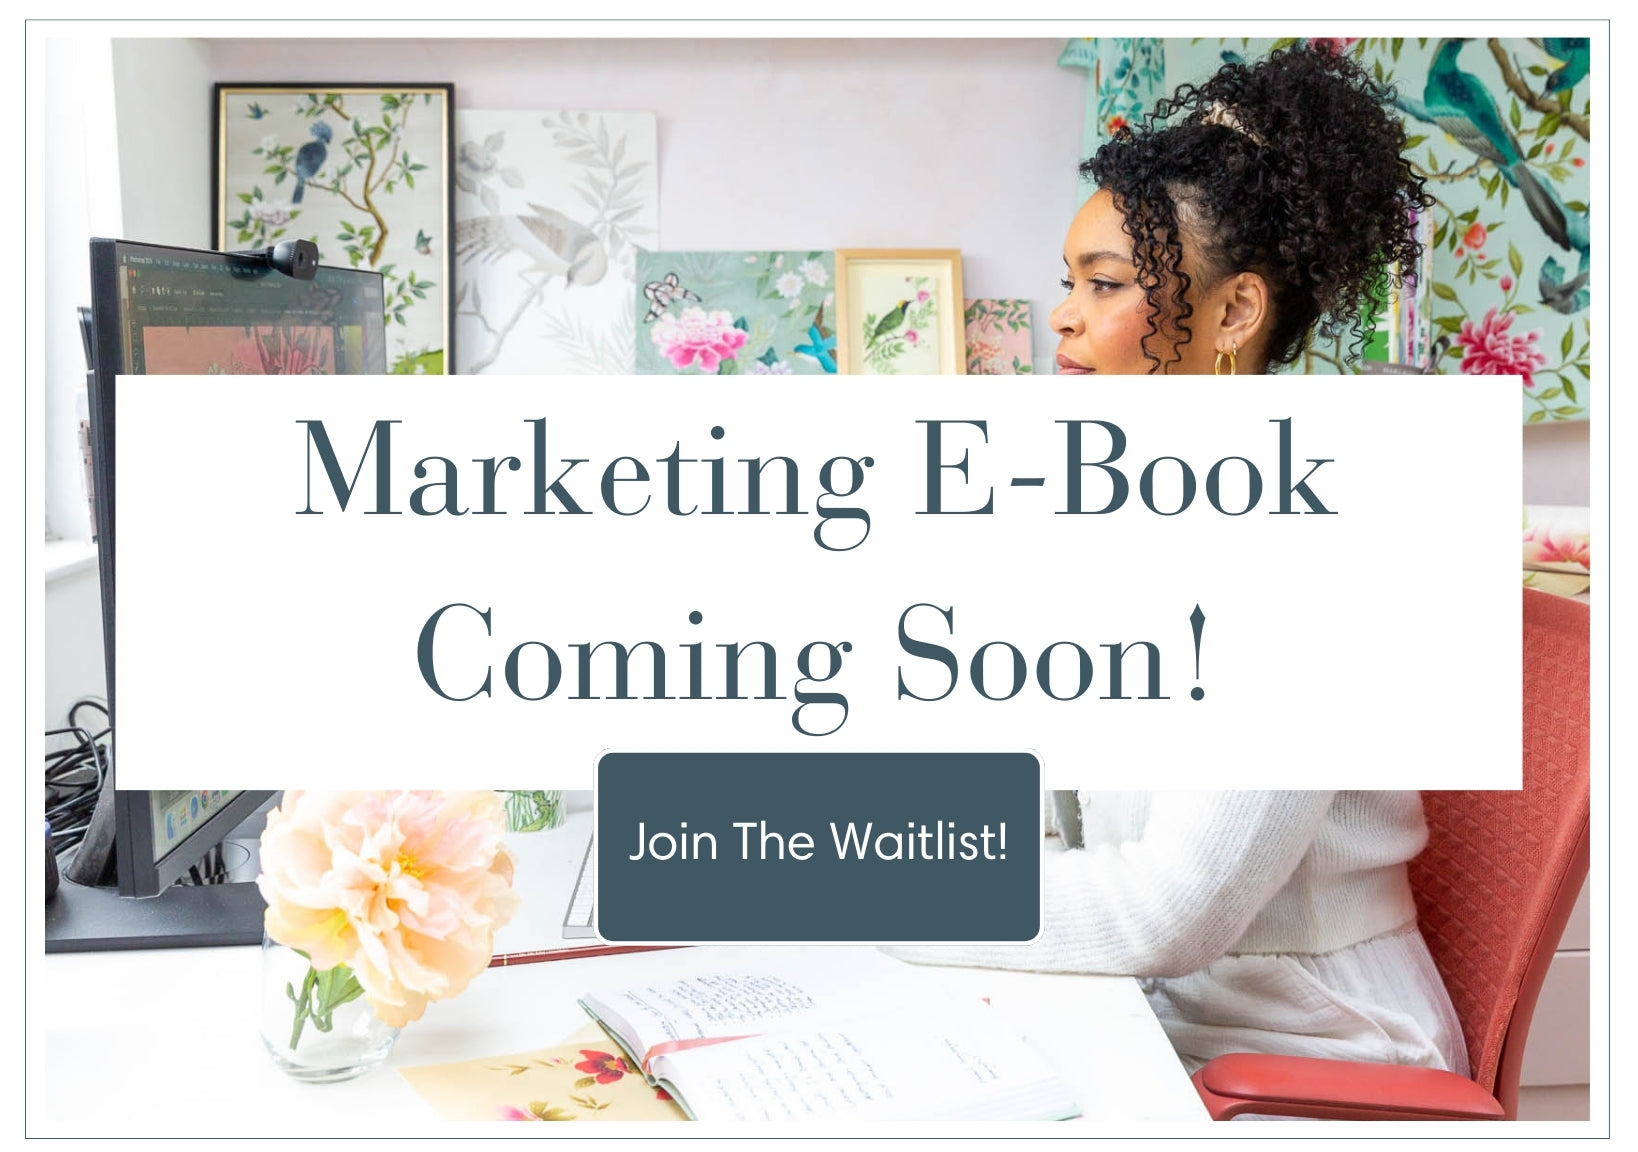 Art business marketing email coming soon join the waitlist